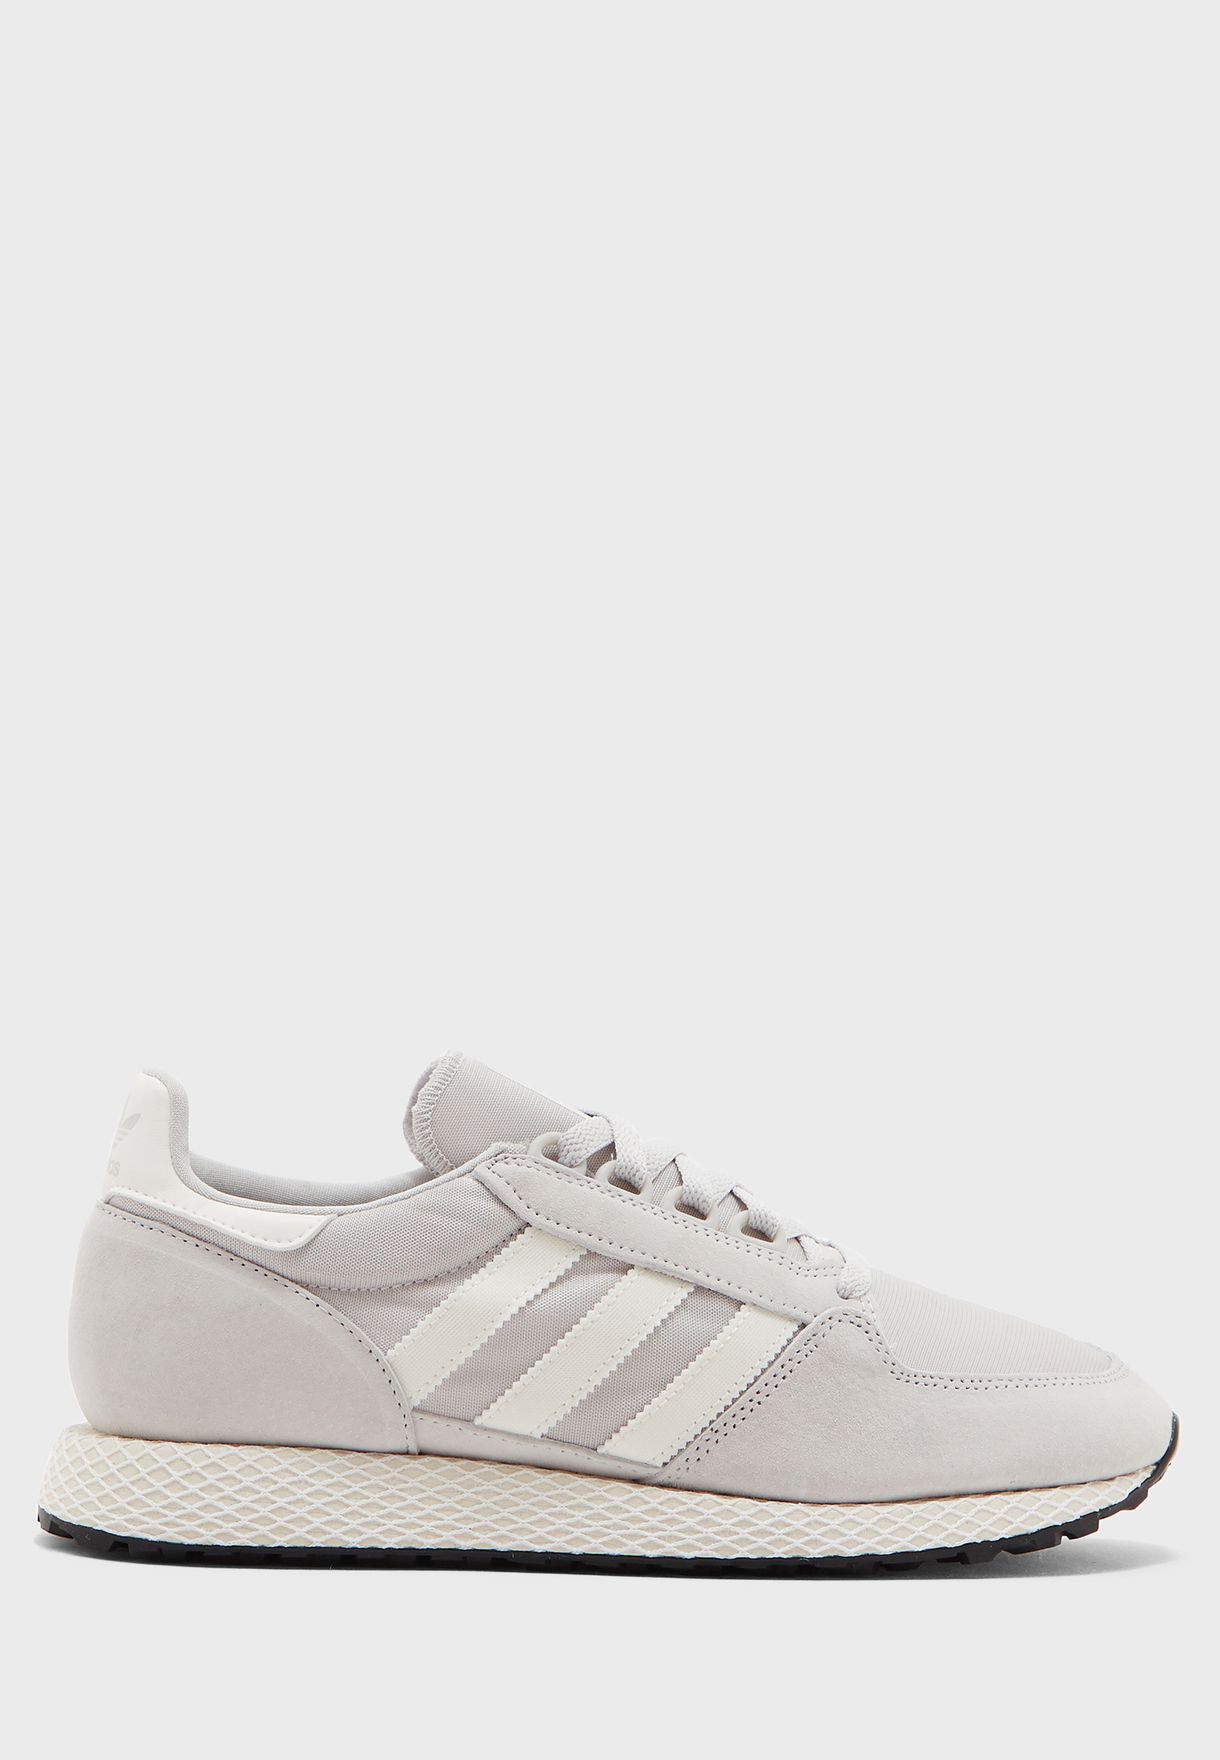 adidas forest grove ee5837